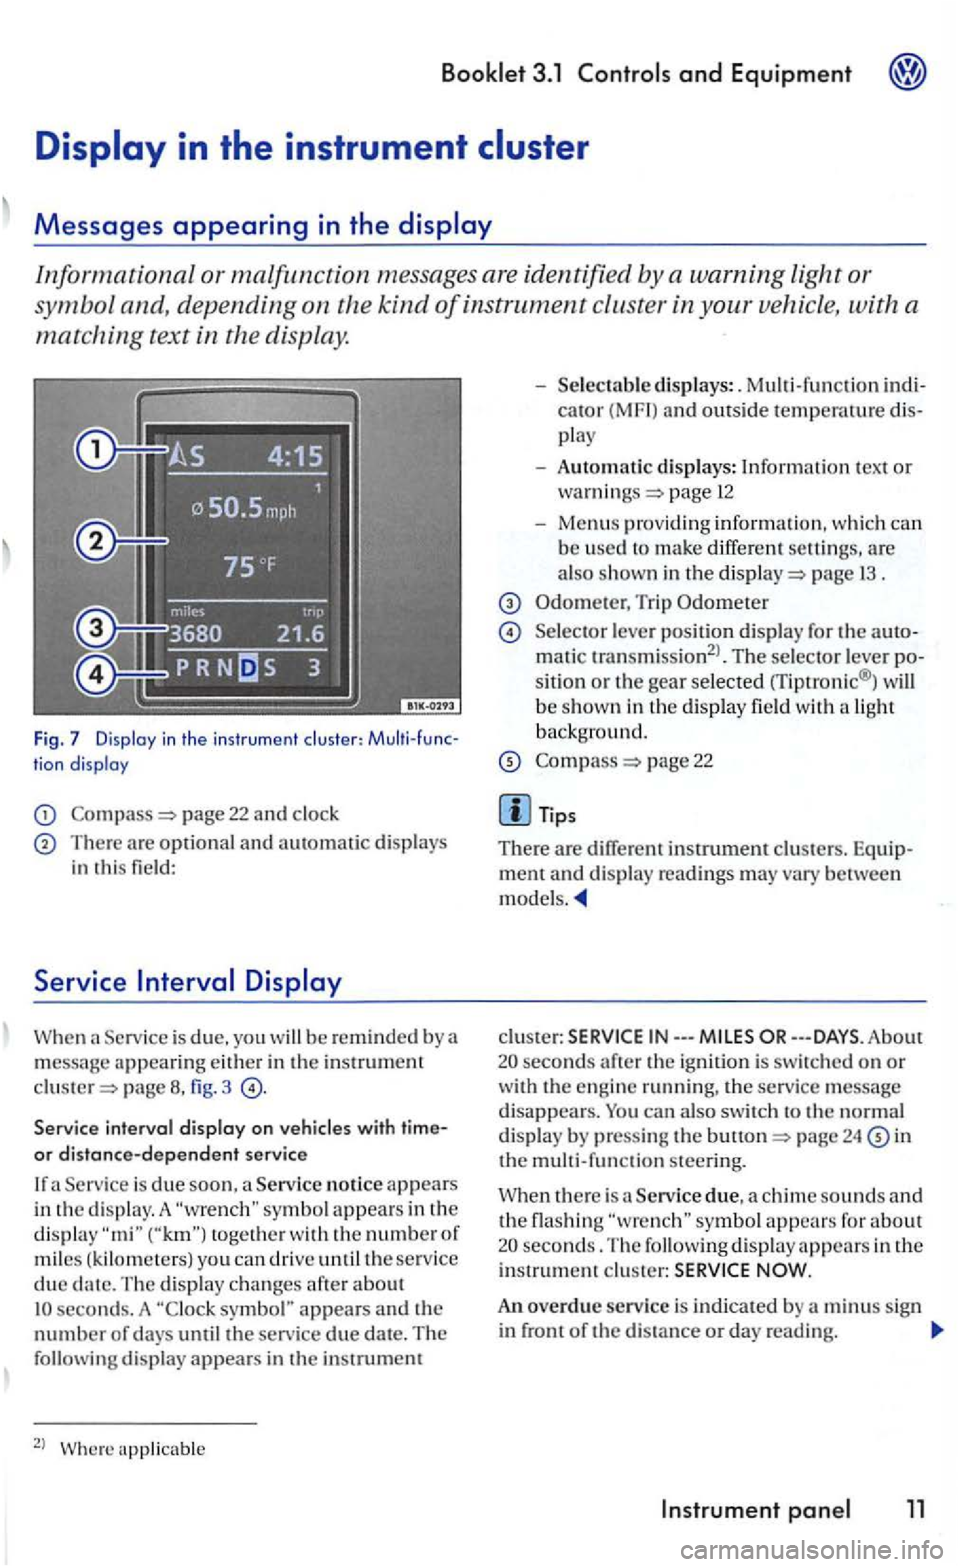 VOLKSWAGEN GOLF 2004  Owners Manual Informational or malfunction messages are identified by a  warning  light or 
symbo l and,  depending  on  the 
kind of instrument cluster in your vehicle , with  a 
matching text in the  display. 
Fi